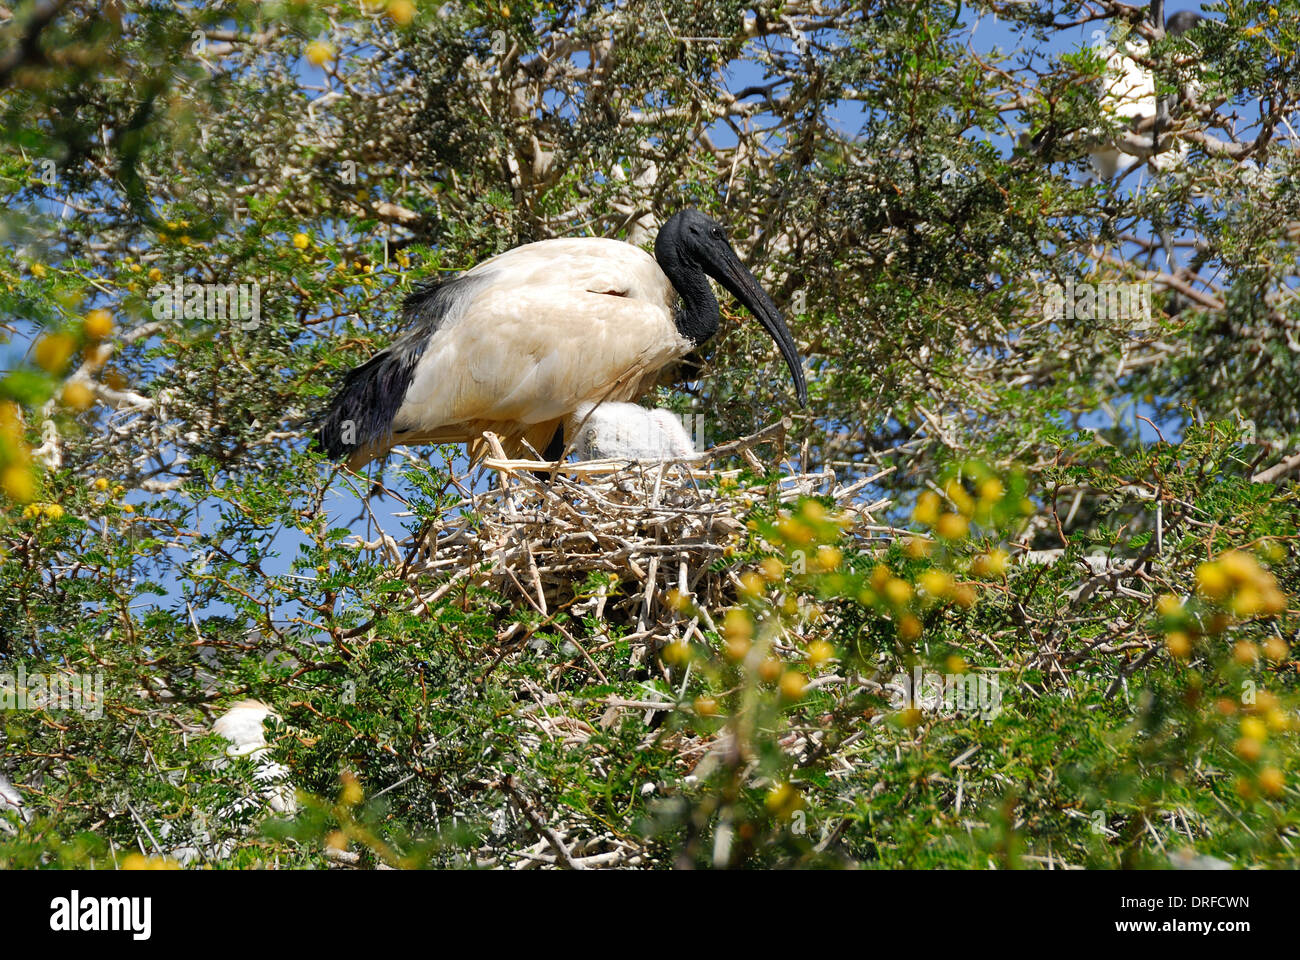 Sacred Ibis bird, standing over  her chick, in the nest. Stock Photo